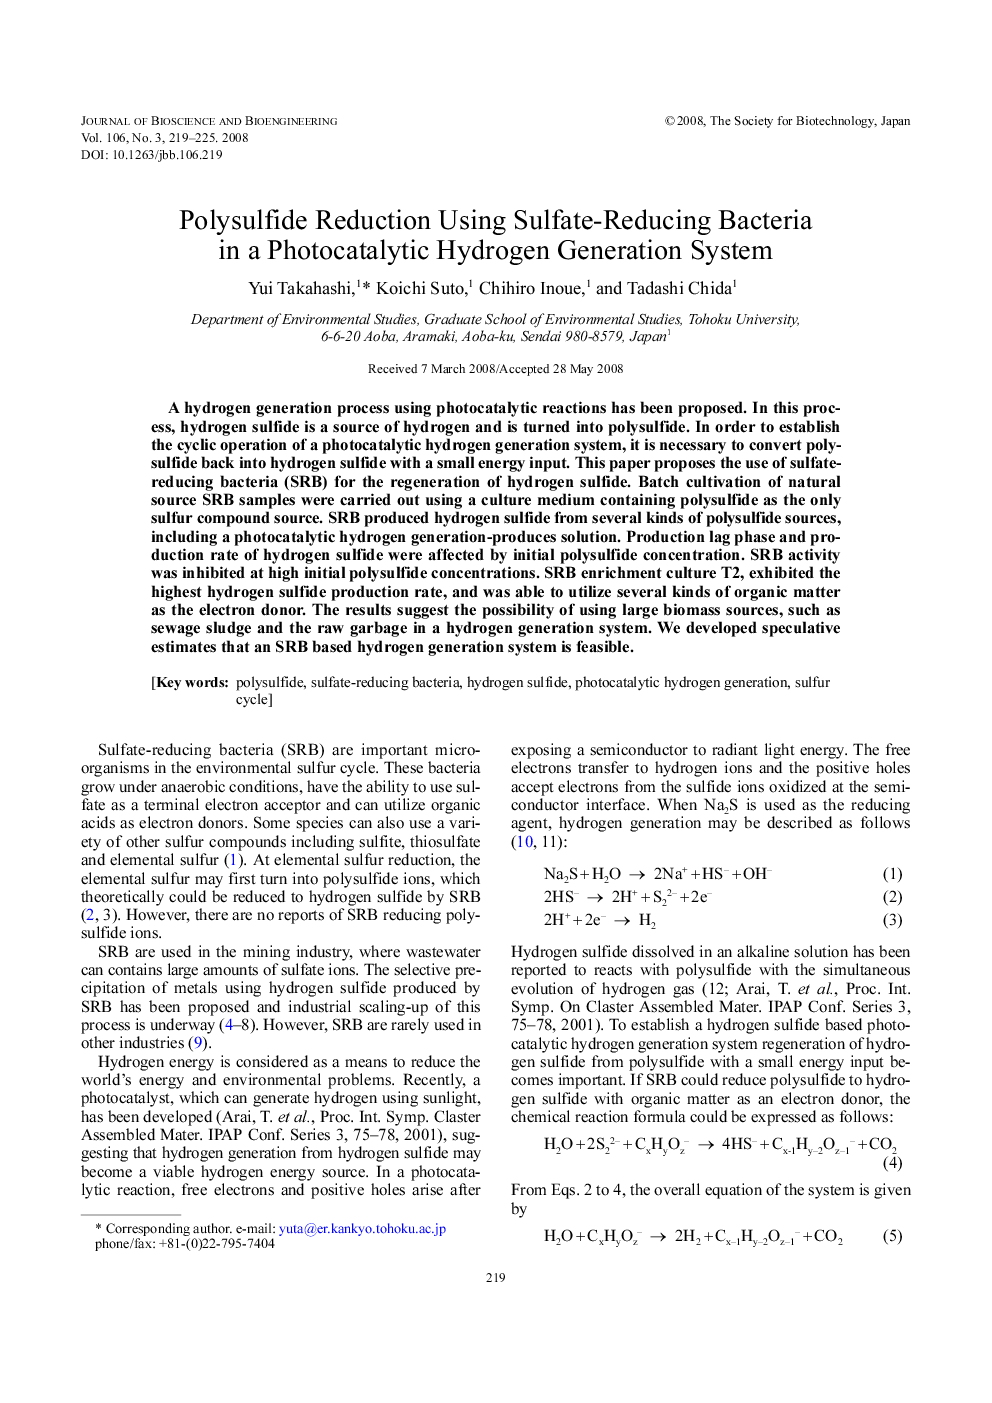 Polysulfide reduction using sulfate-reducing bacteria in a photocatalytic hydrogen generation system